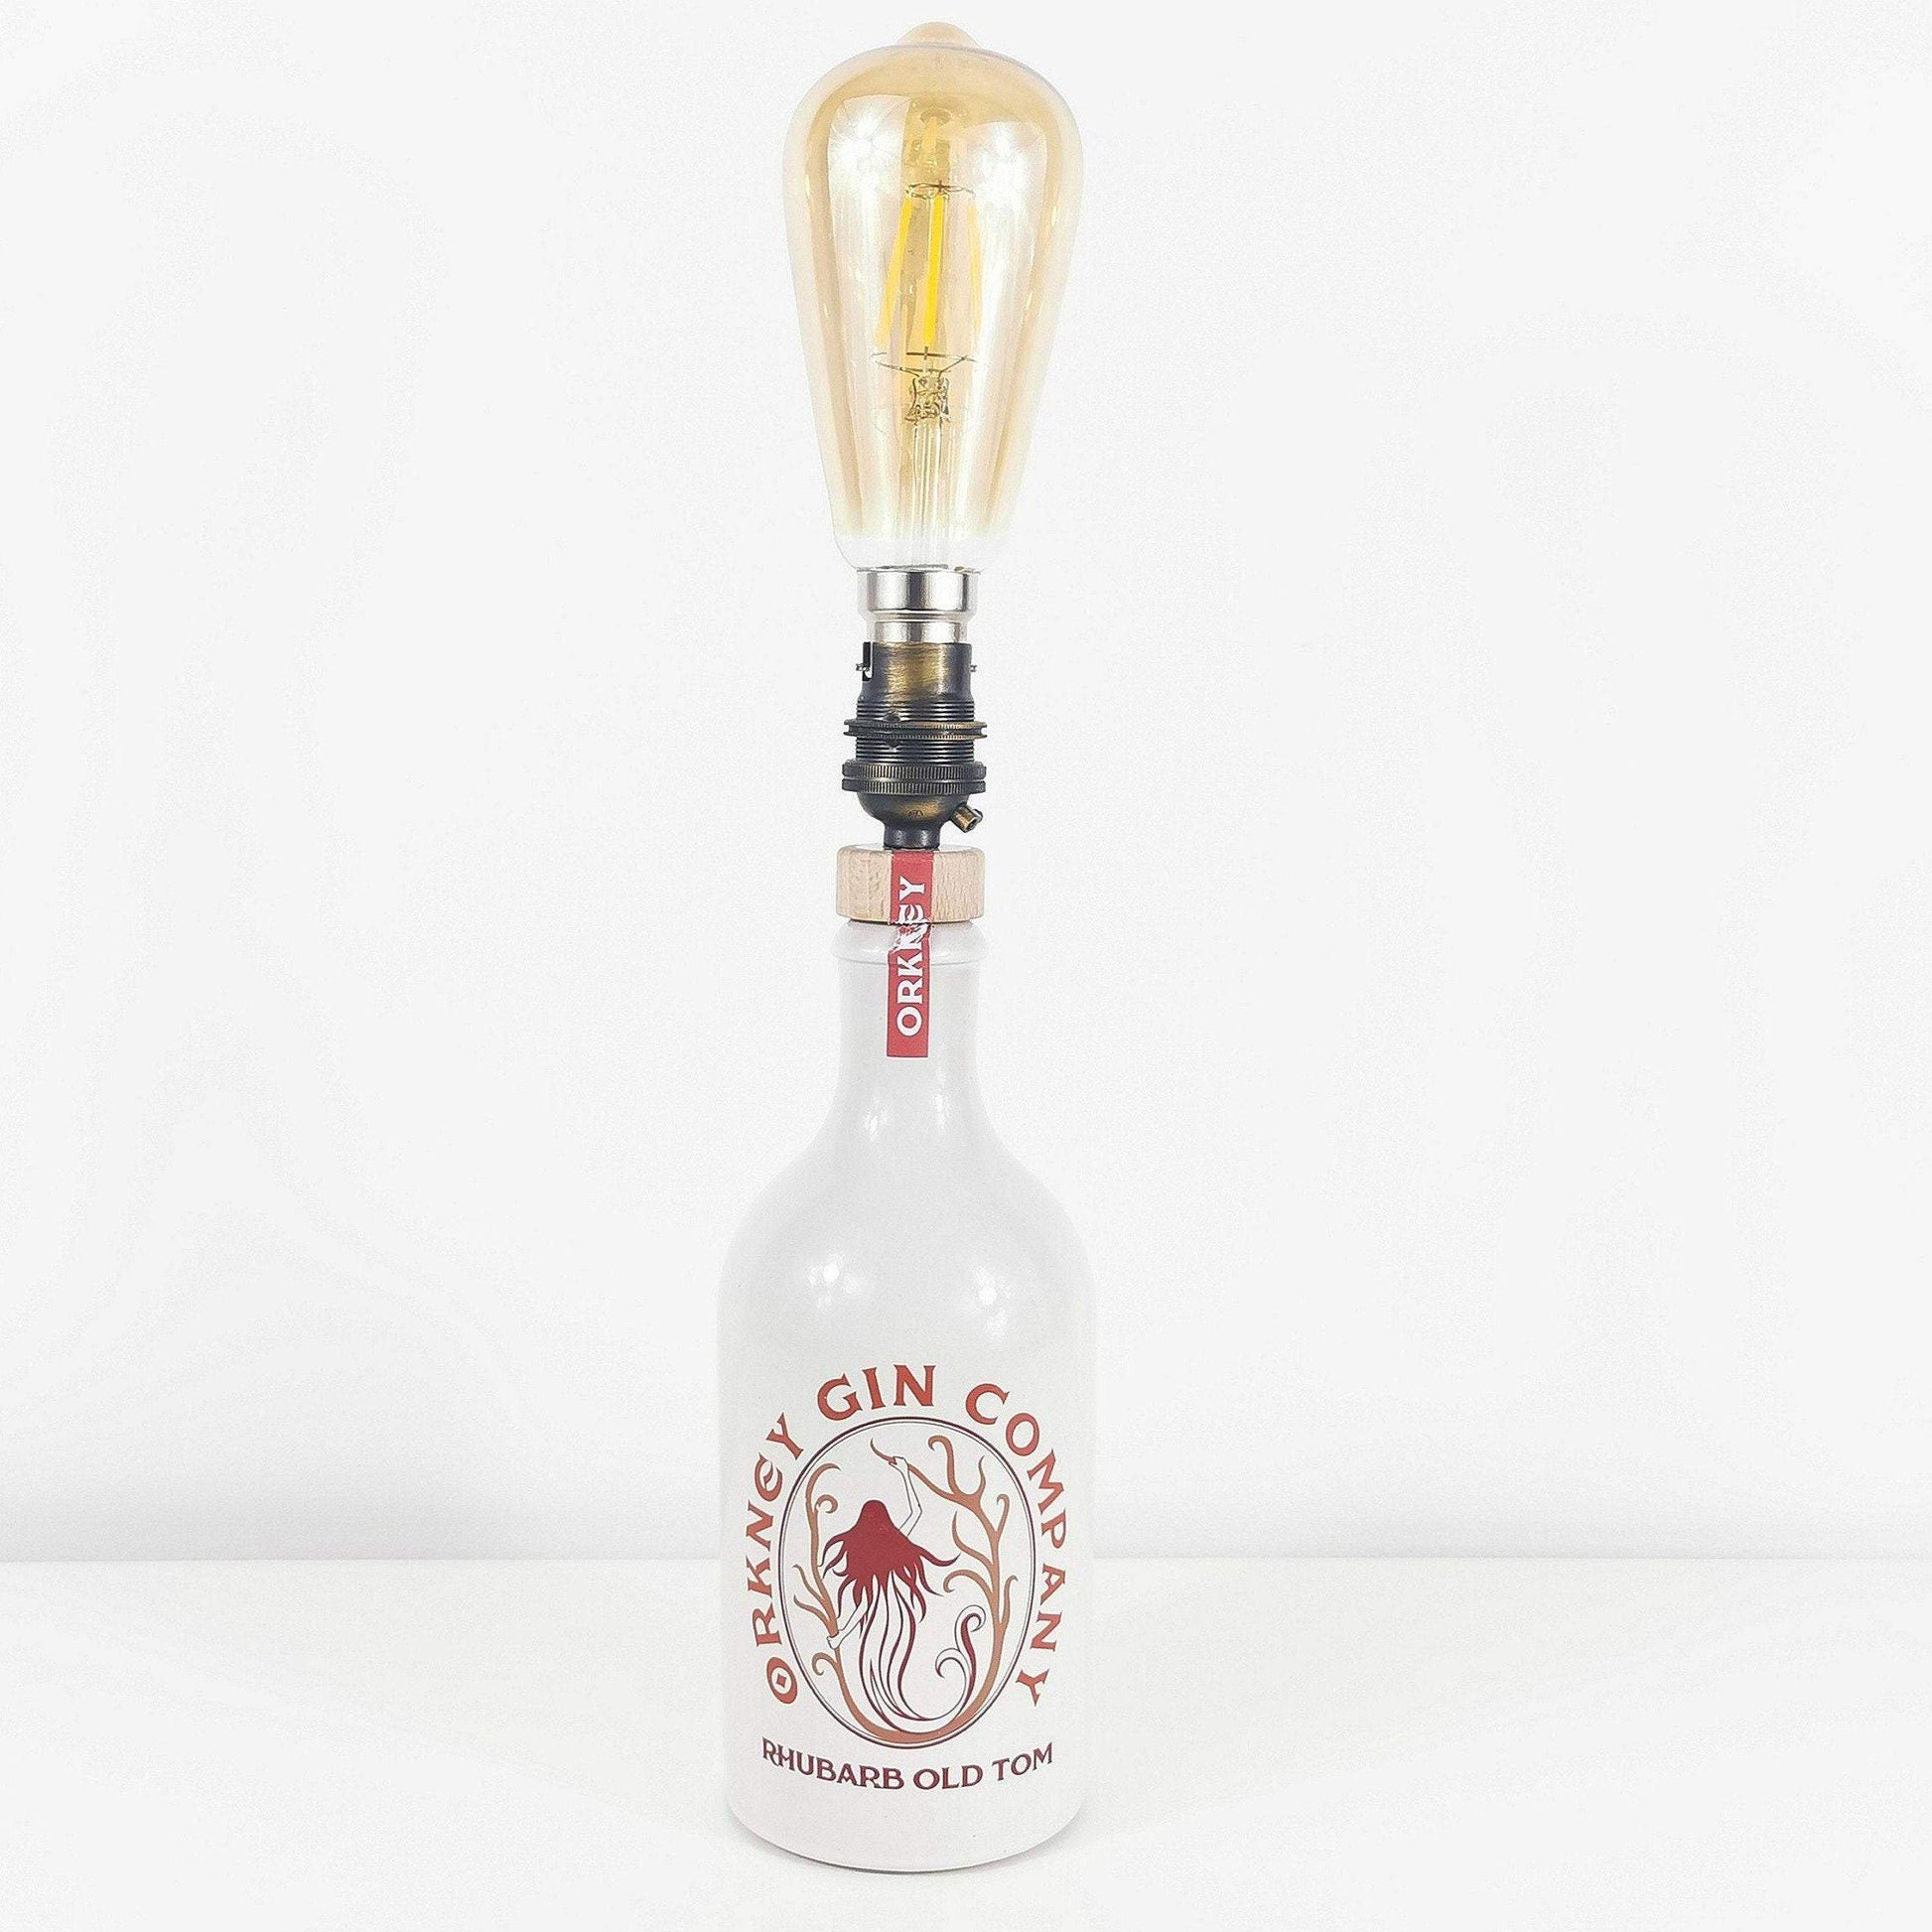 Orkney Gin Co. Rhubarb Old Tom Gin Bottle Table Lamp Gin Bottle Table Lamps